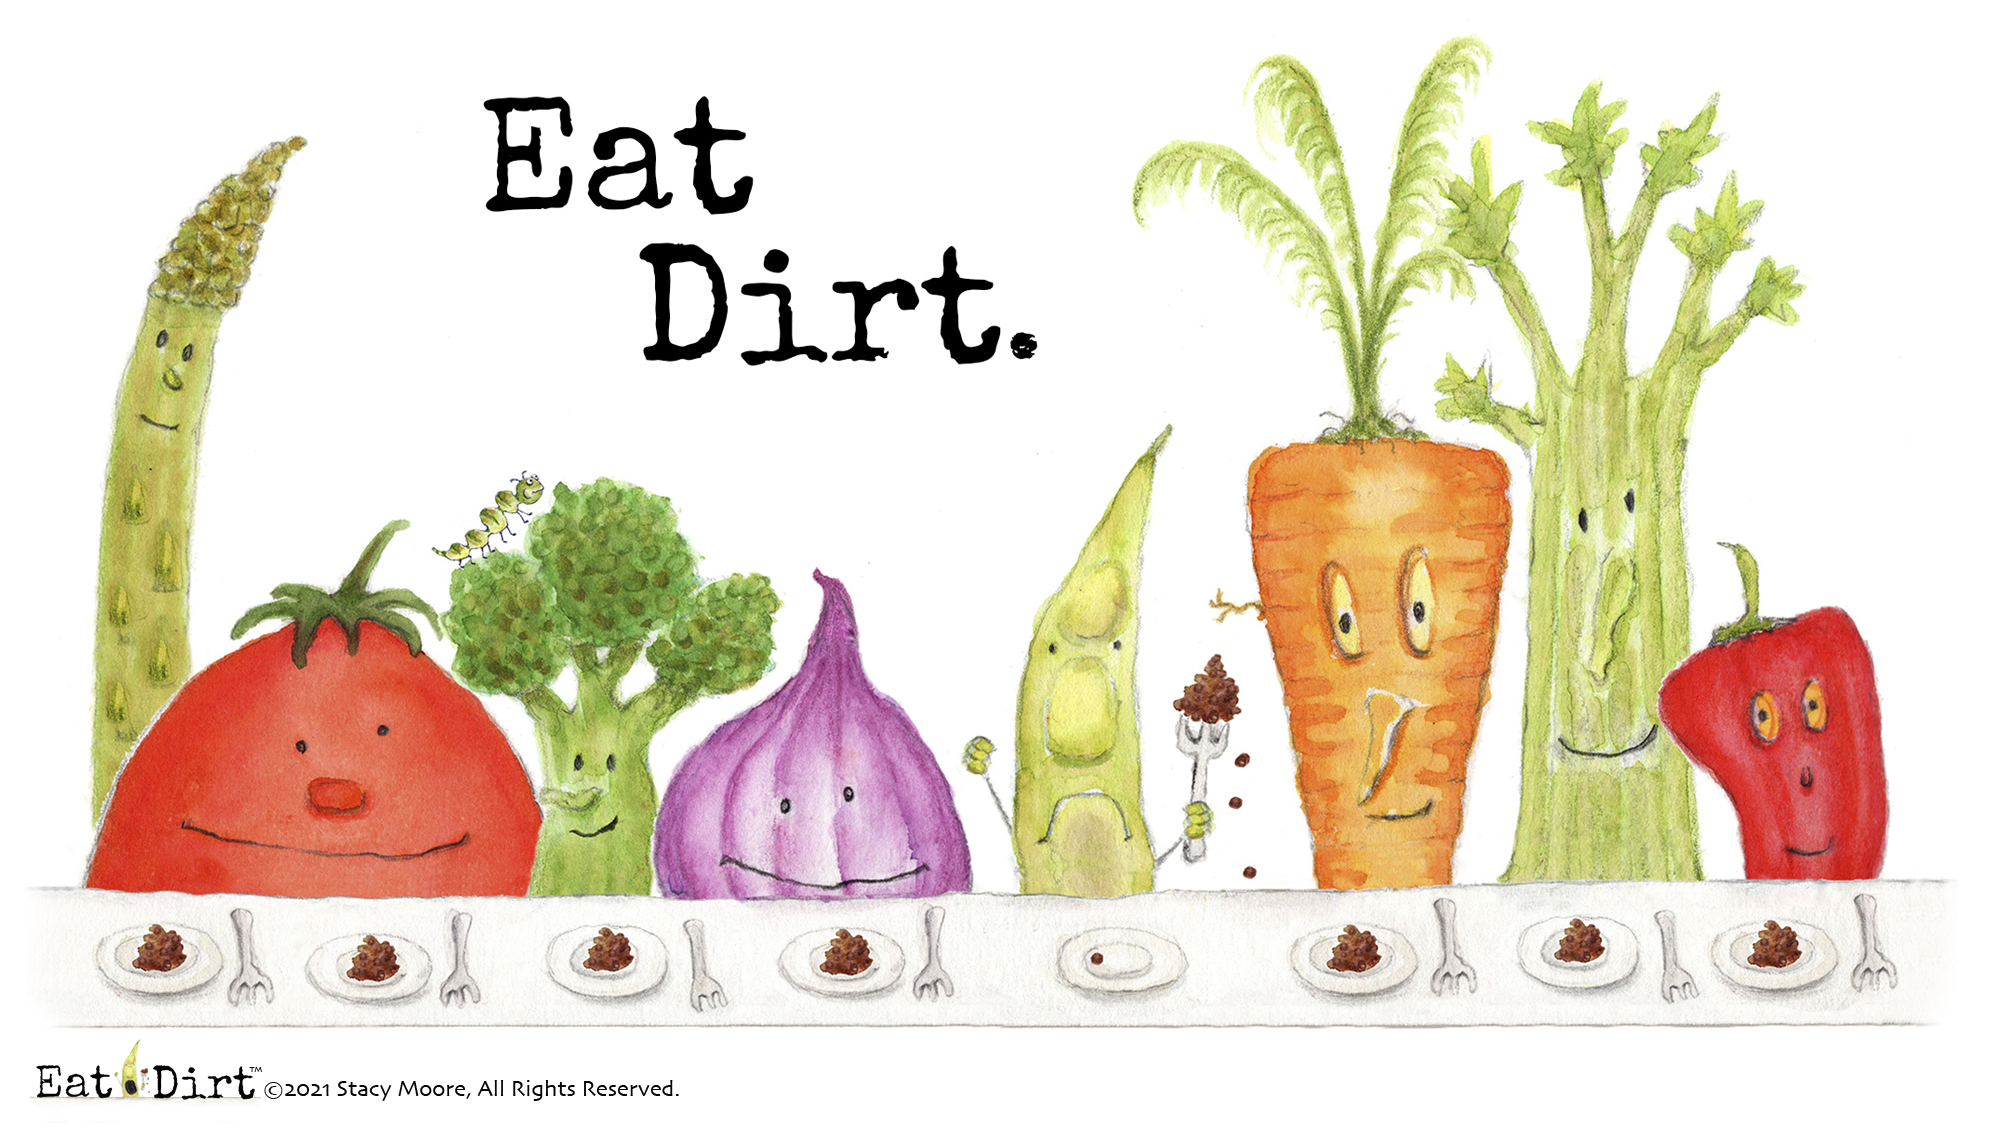 Above: Eat Dirt is a concept by Stacy Moore.